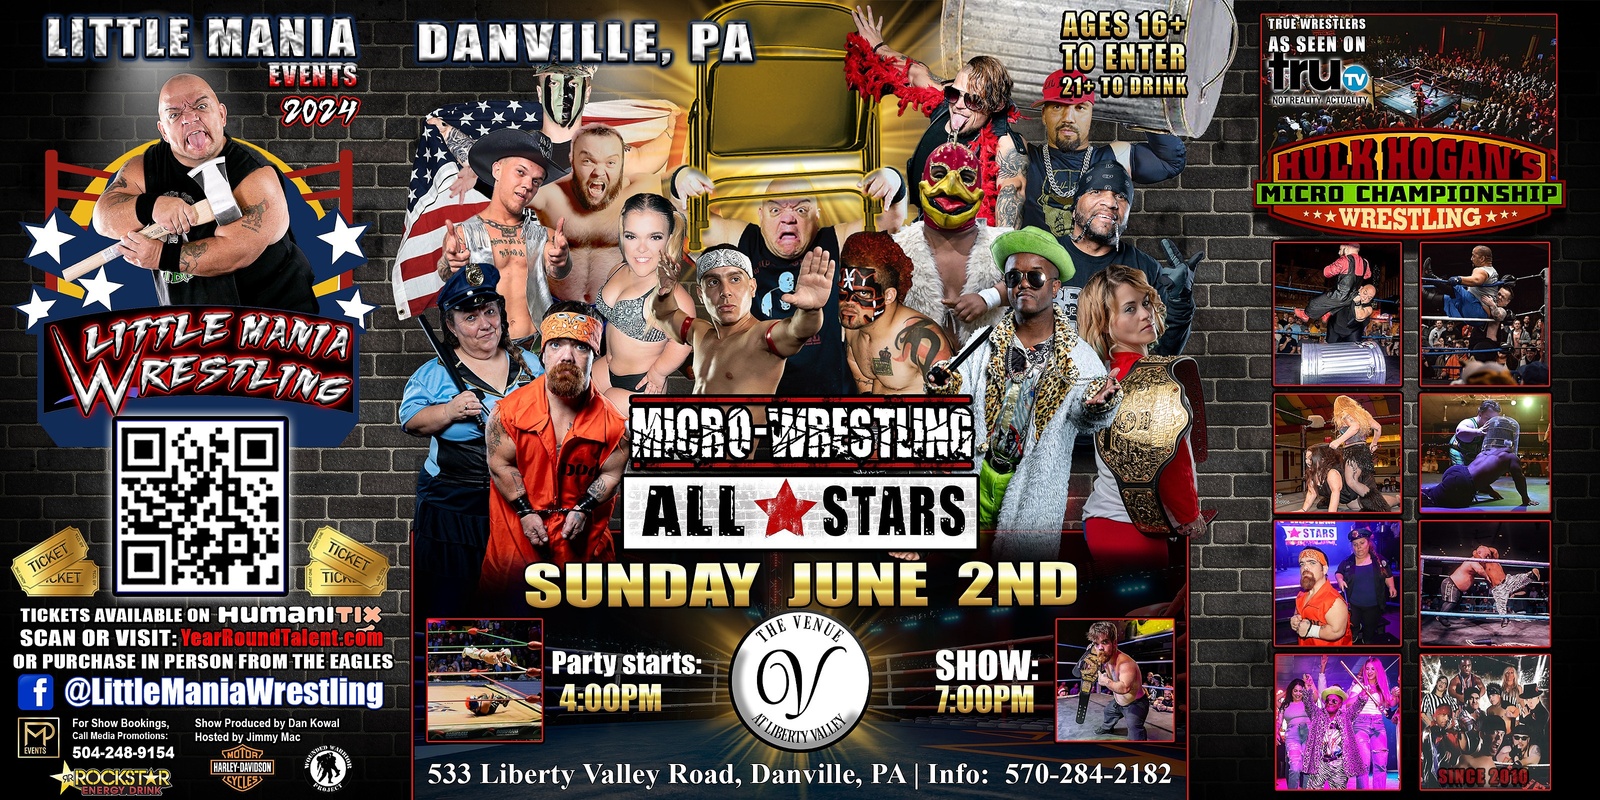 Banner image for Danville, PA - Micro-Wrestling All * Stars, Show: Little Mania Rips Through the Ring!